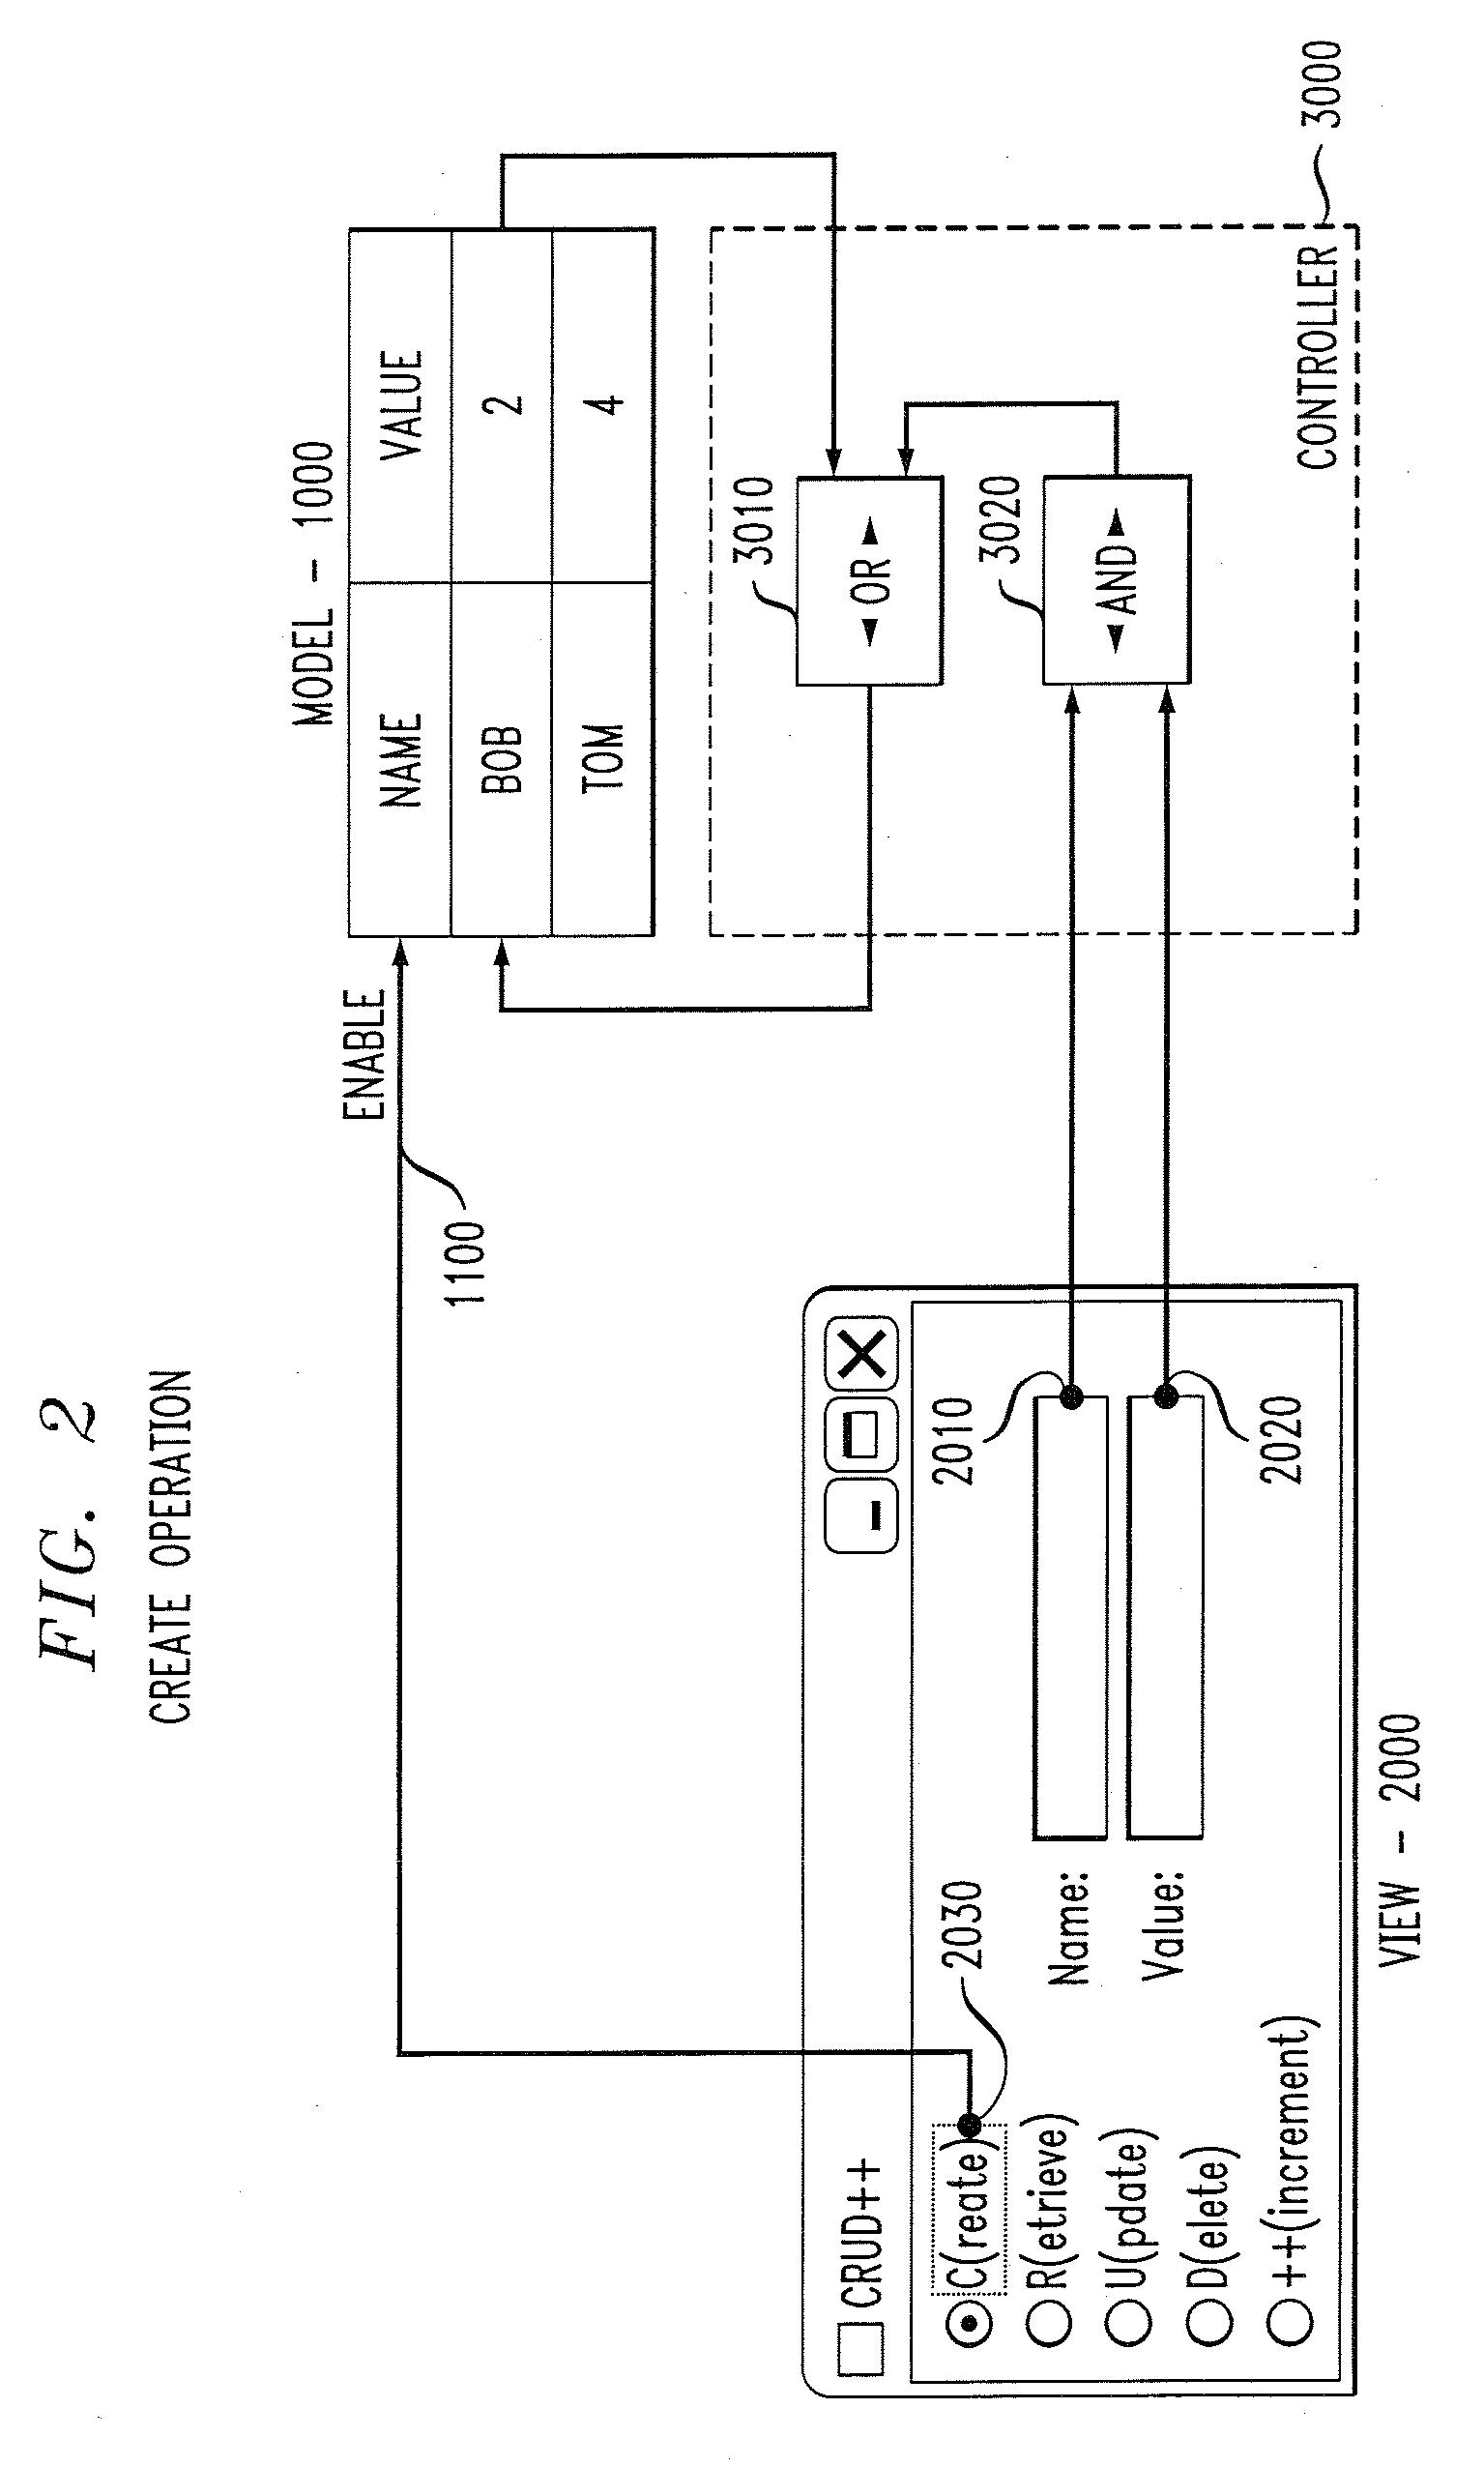 Methods and Apparatus for Constructing Declarative Componentized Applications